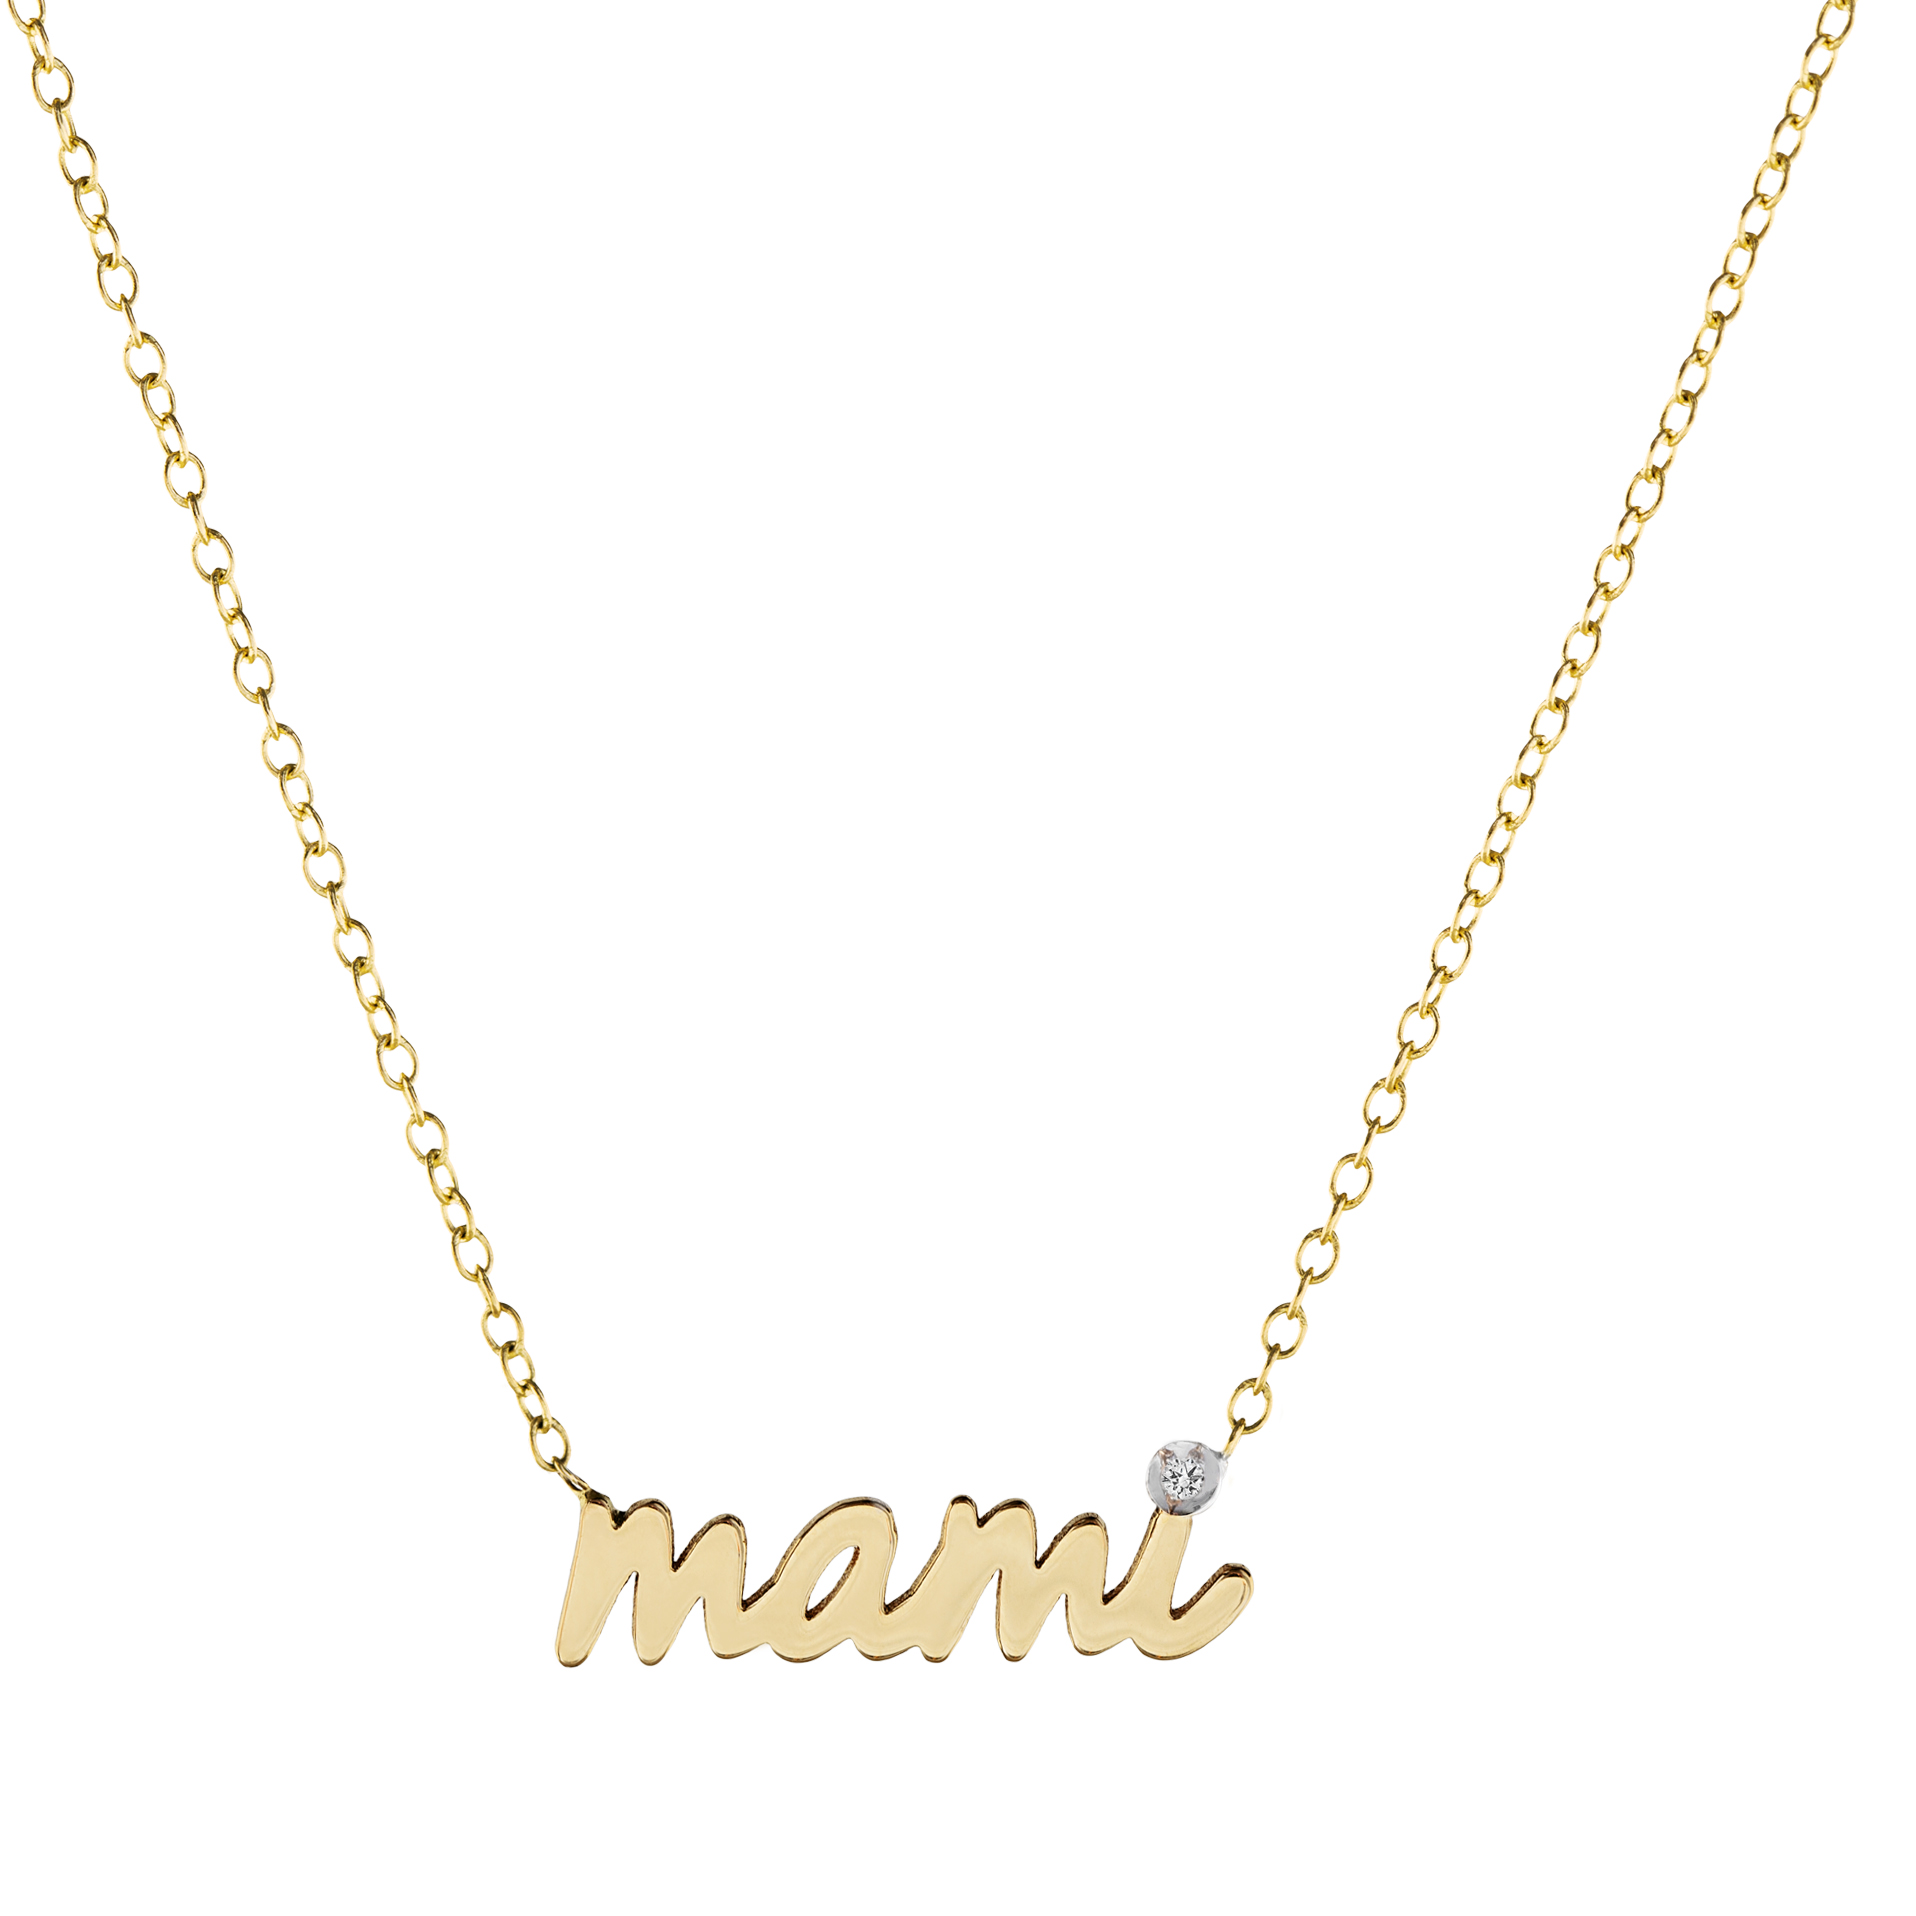 Mami Nameplate Necklace, in 14K gold with a diamond, by Bonnie Jennifer.